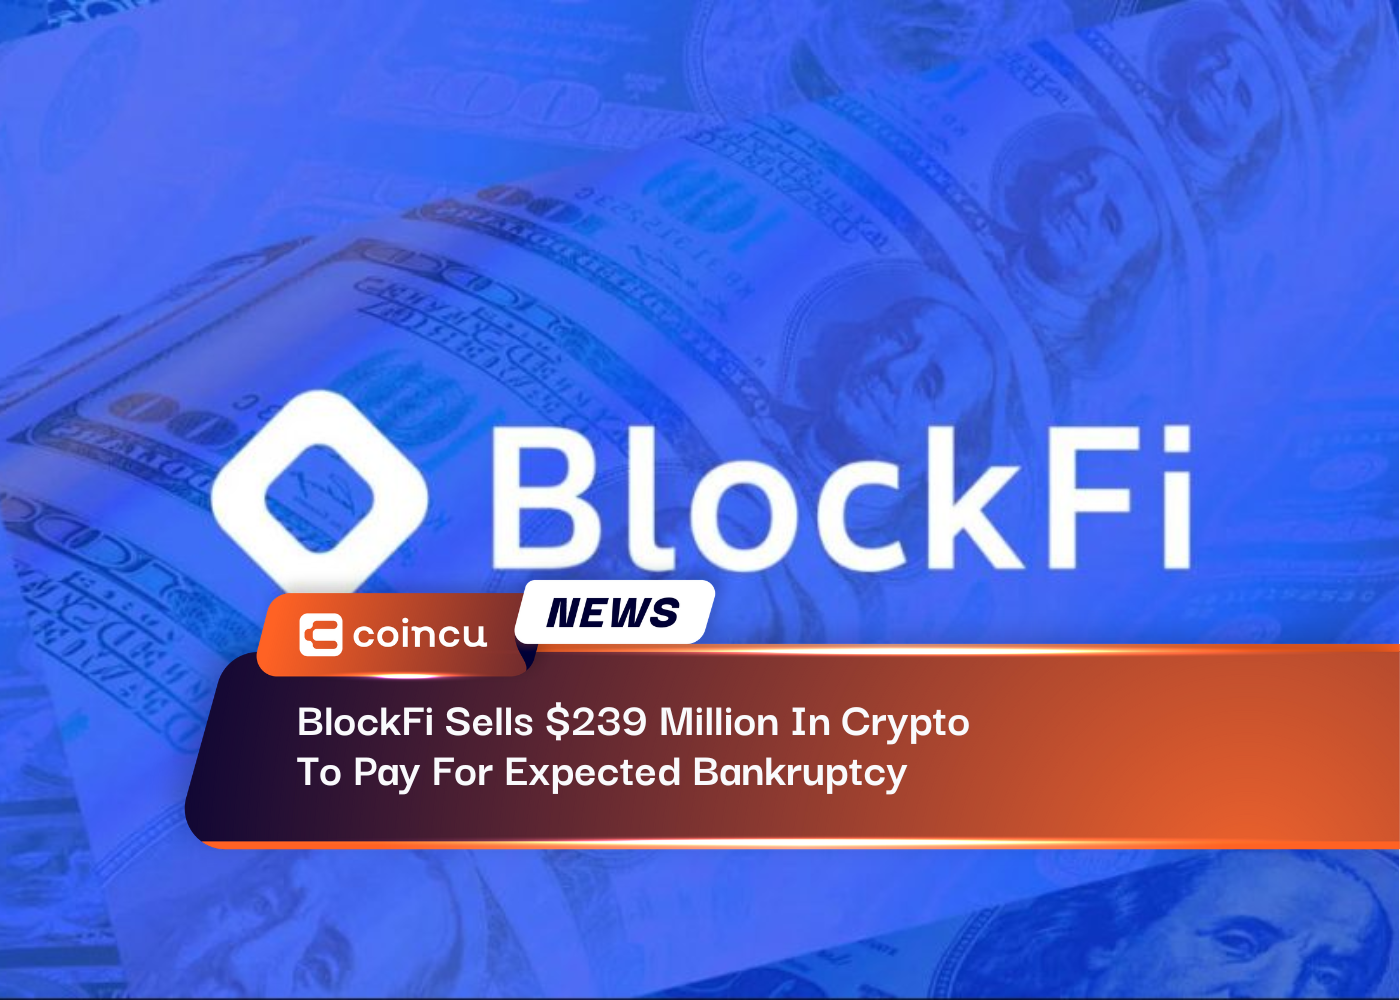 BlockFi Sells $239 Million In Crypto To Pay For Expected Bankruptcy